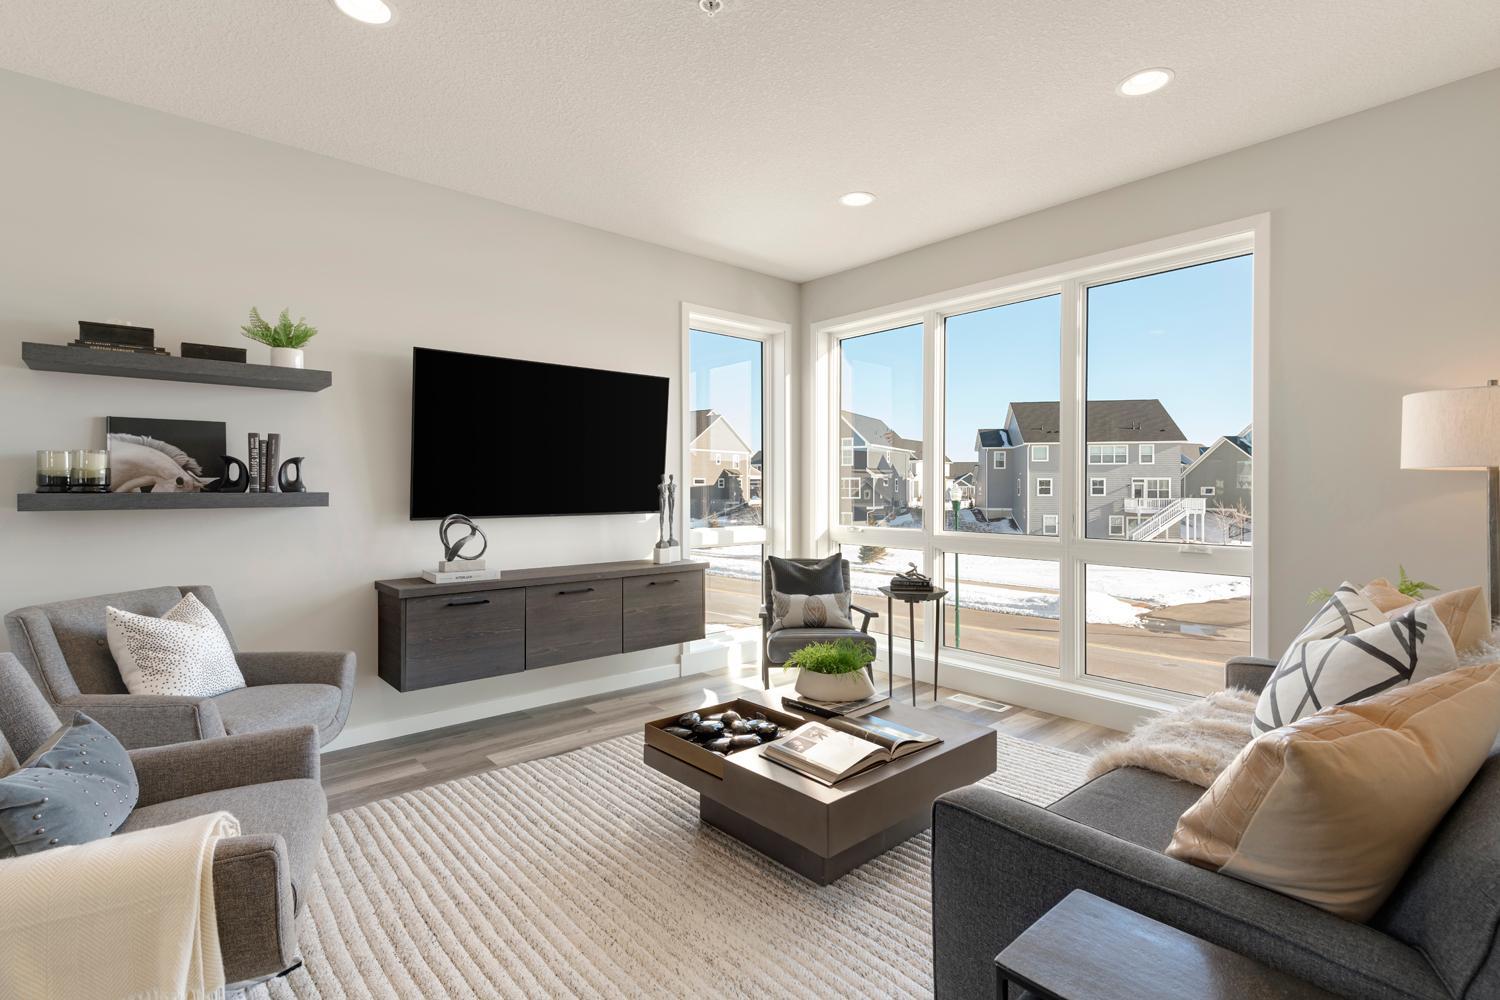 Urban inspired interiors with luxury features. Photo is of model home; options and features will vary.